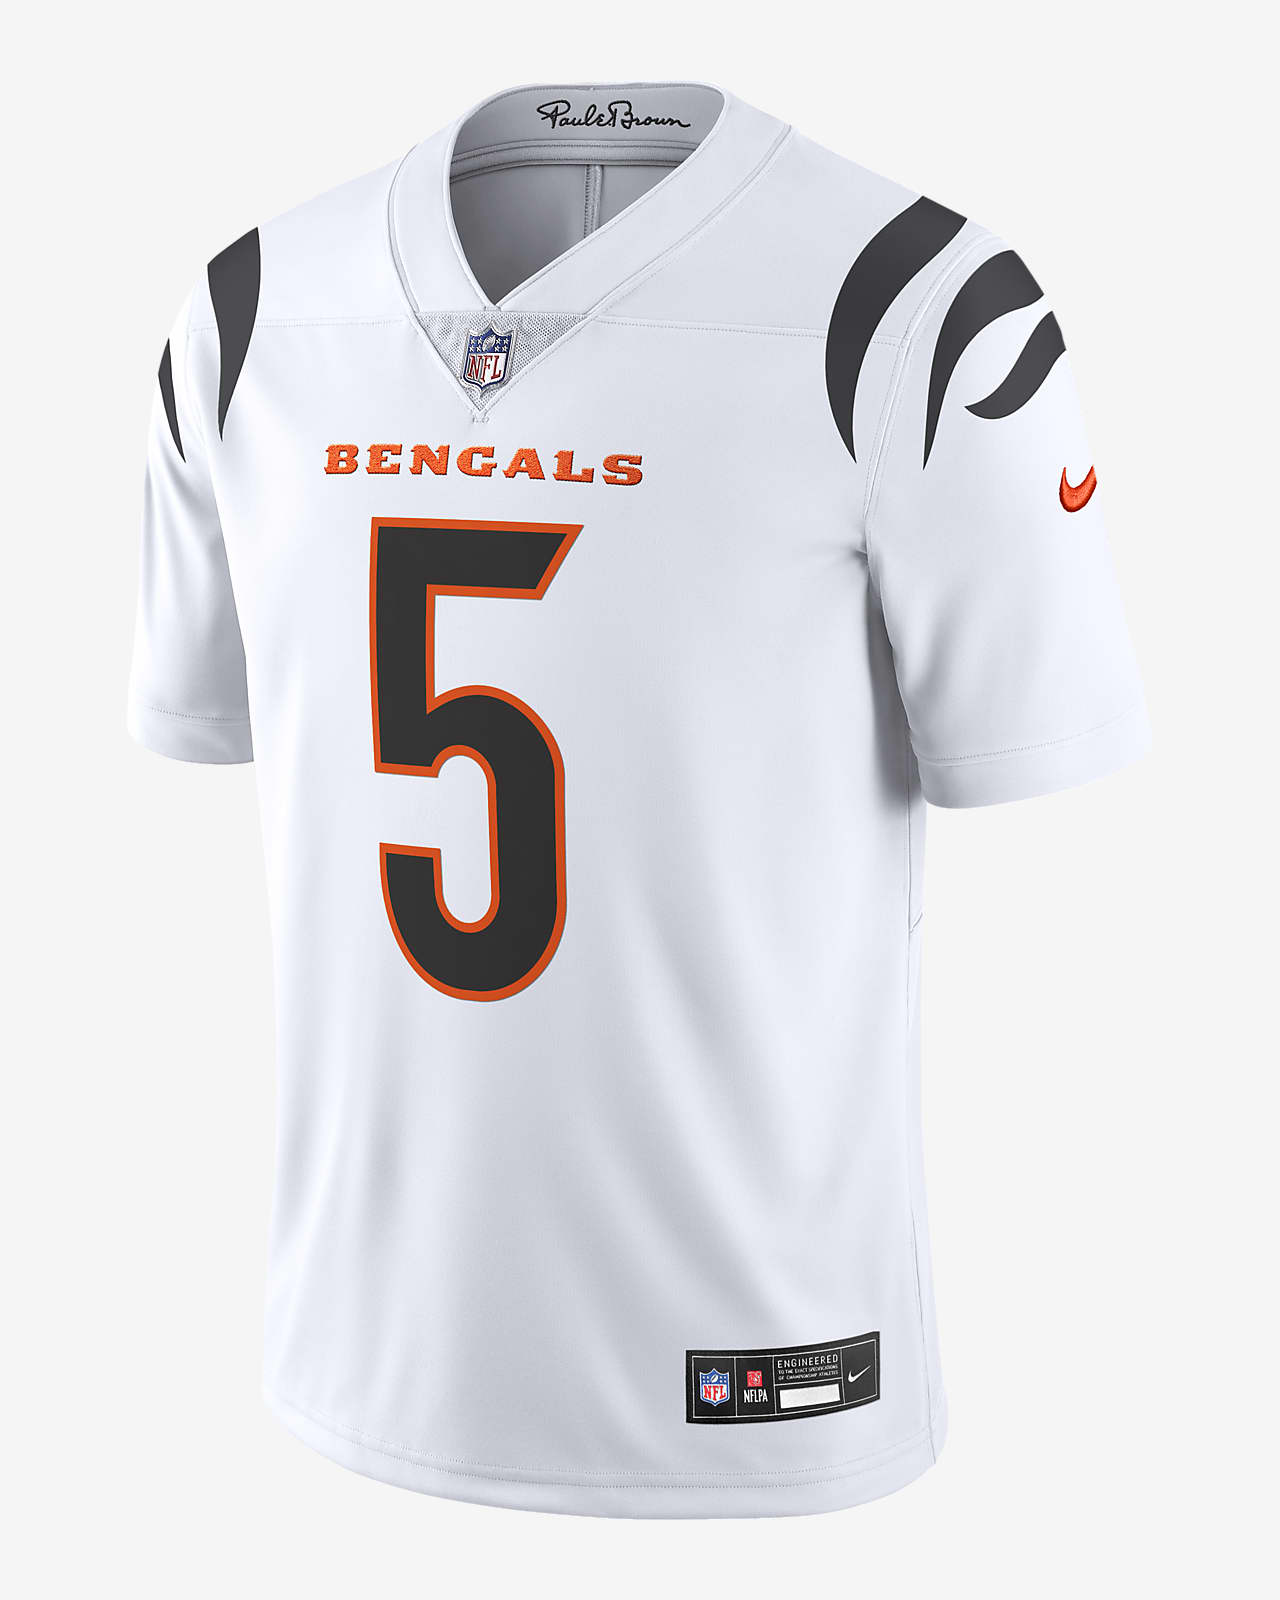 Nike NFL Jersey Review - Which Size to Get? 